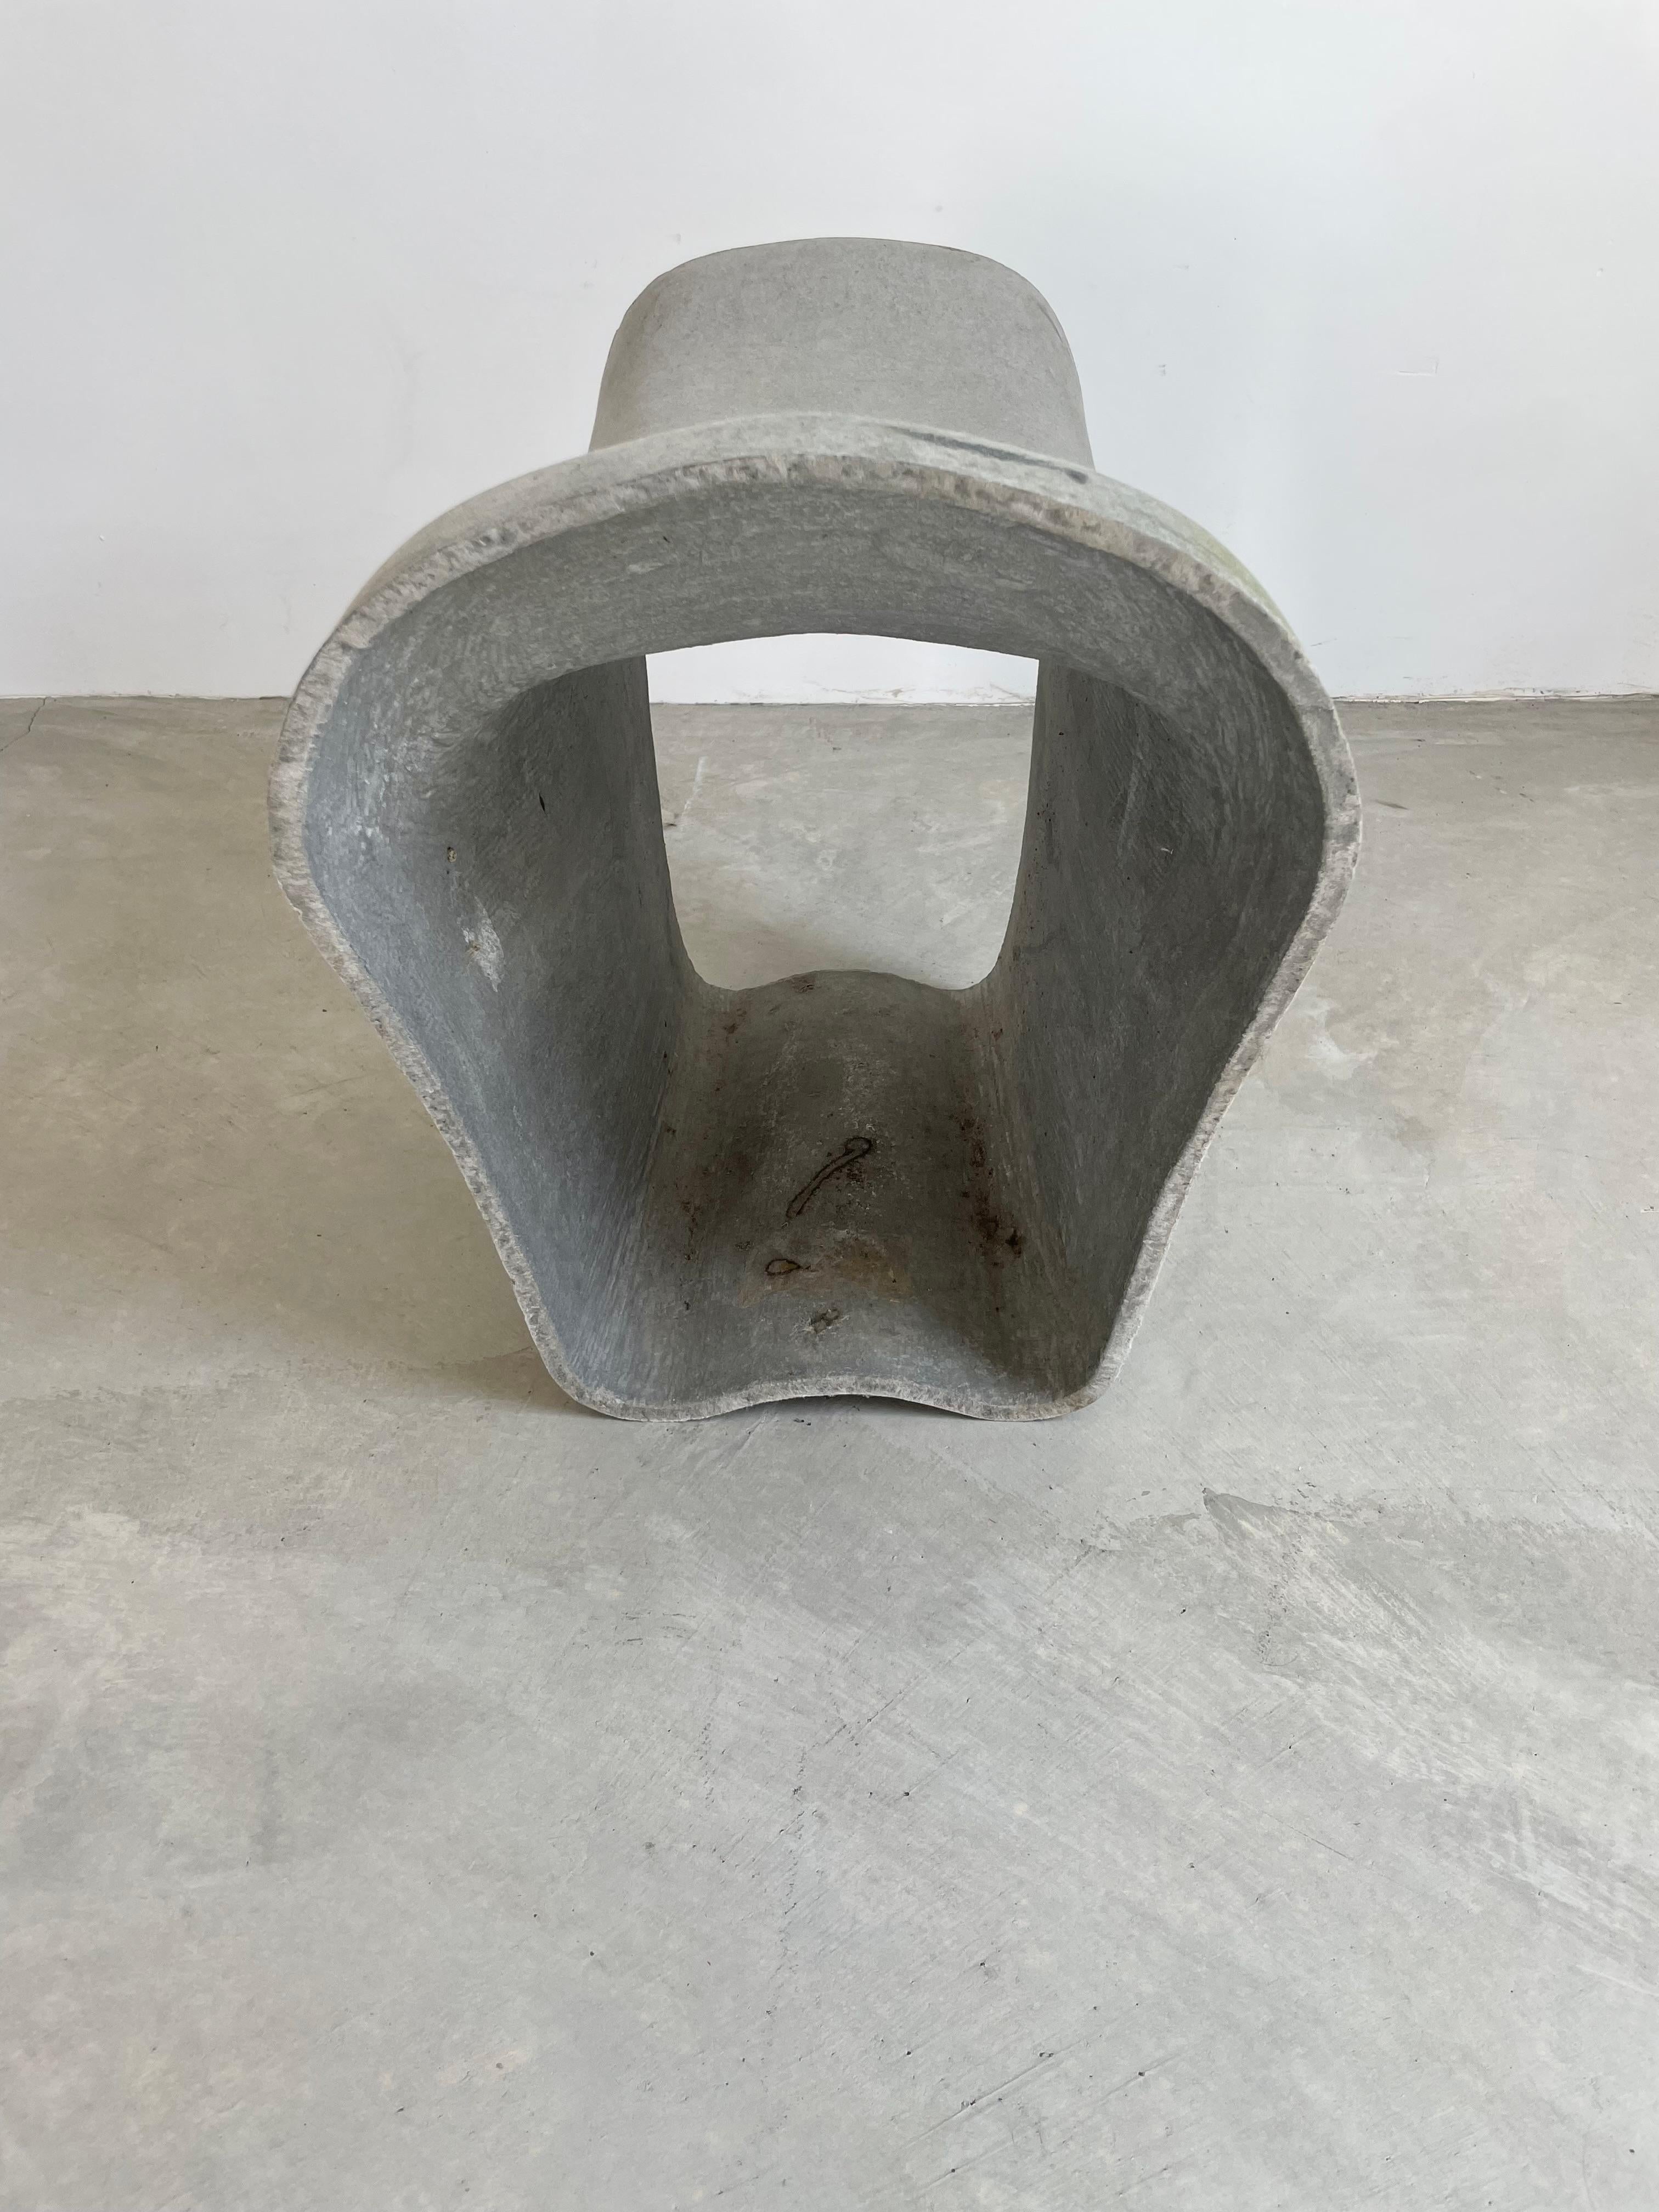 Hand-Crafted Willy Guhl Concrete Saddle Stool, 1960s